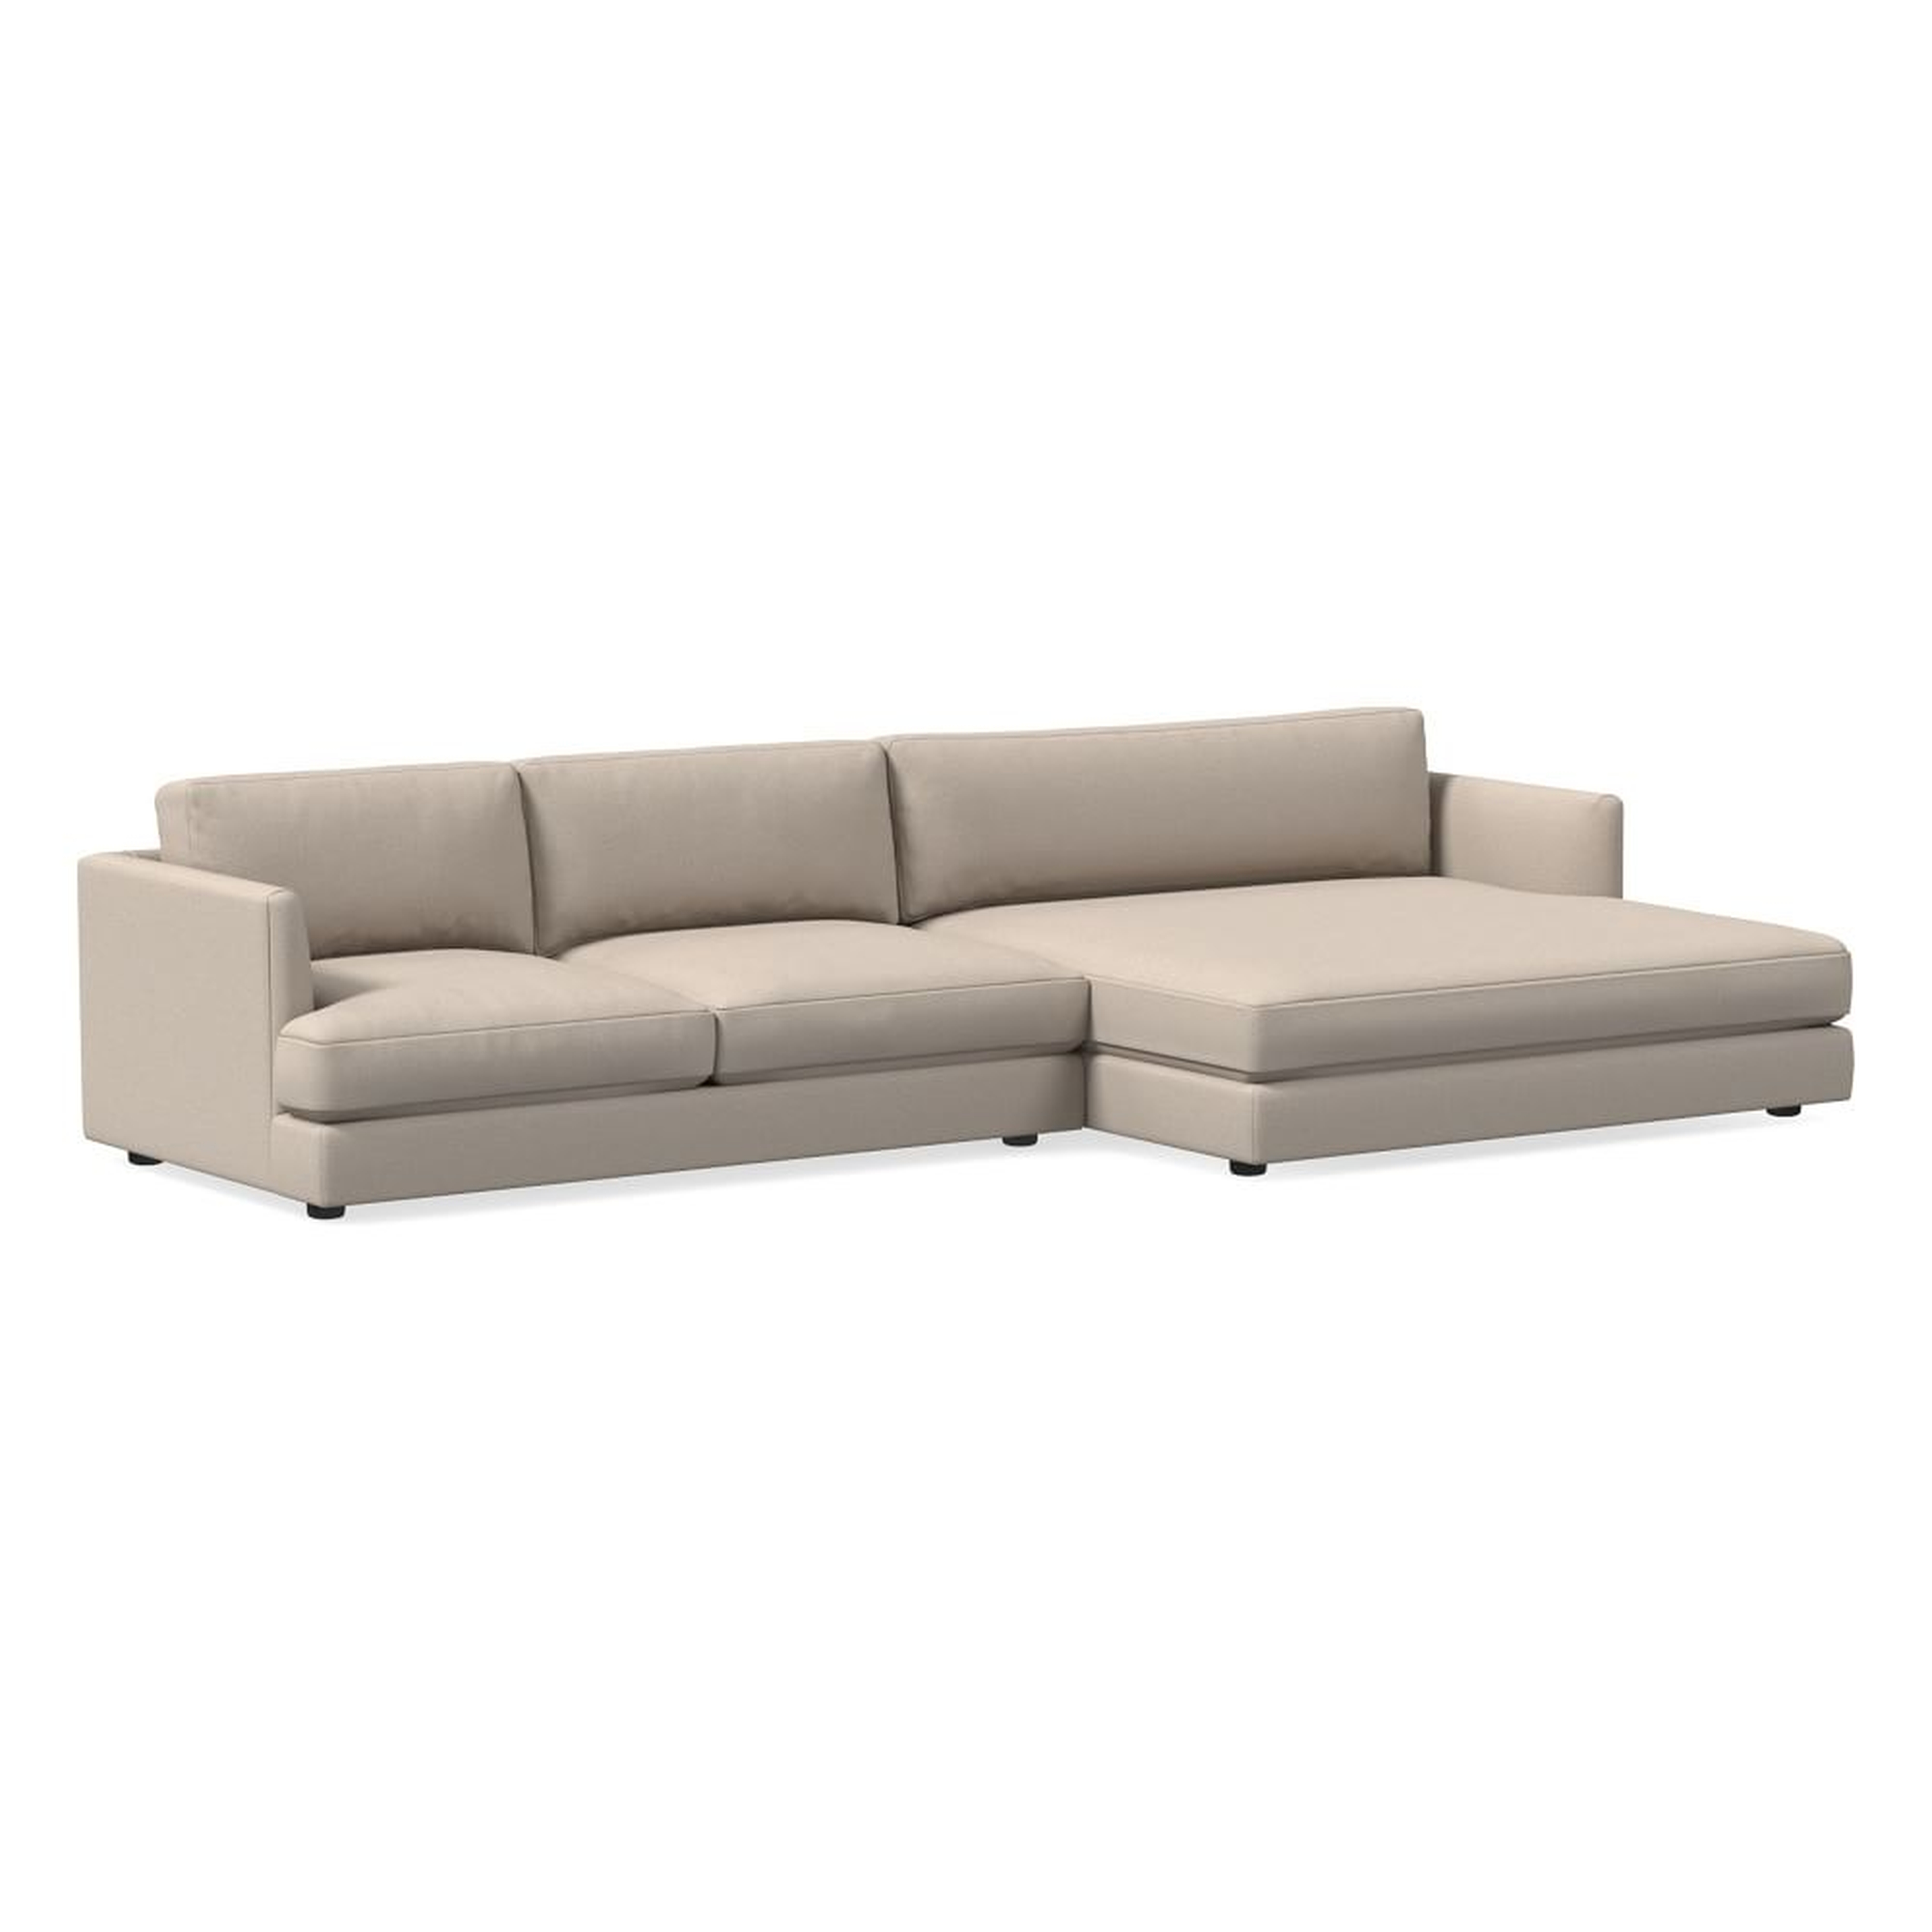 Haven 127" Right Multi Seat Double Wide Chaise Sectional, Standard Depth, Yarn Dyed Linen Weave, Sand - West Elm